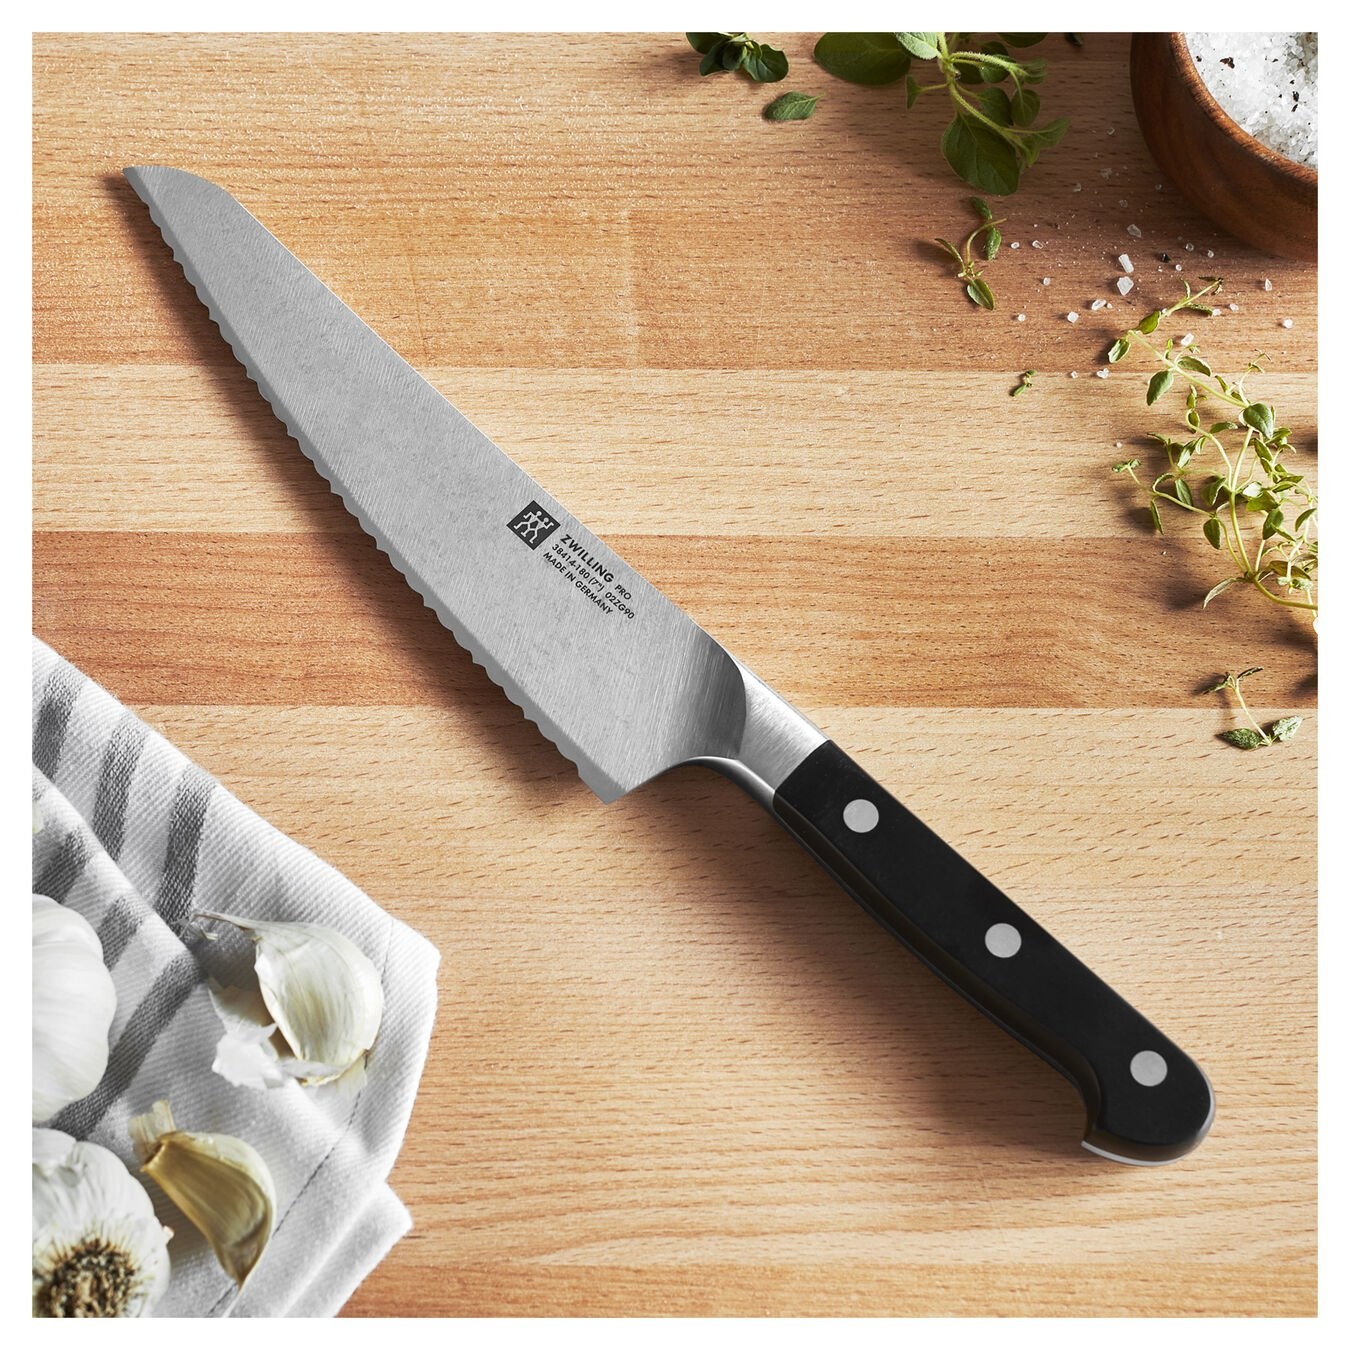 ZWILLING Pro Ultimate Prep Knife, 5.5-inch, Black/Stainless Steel